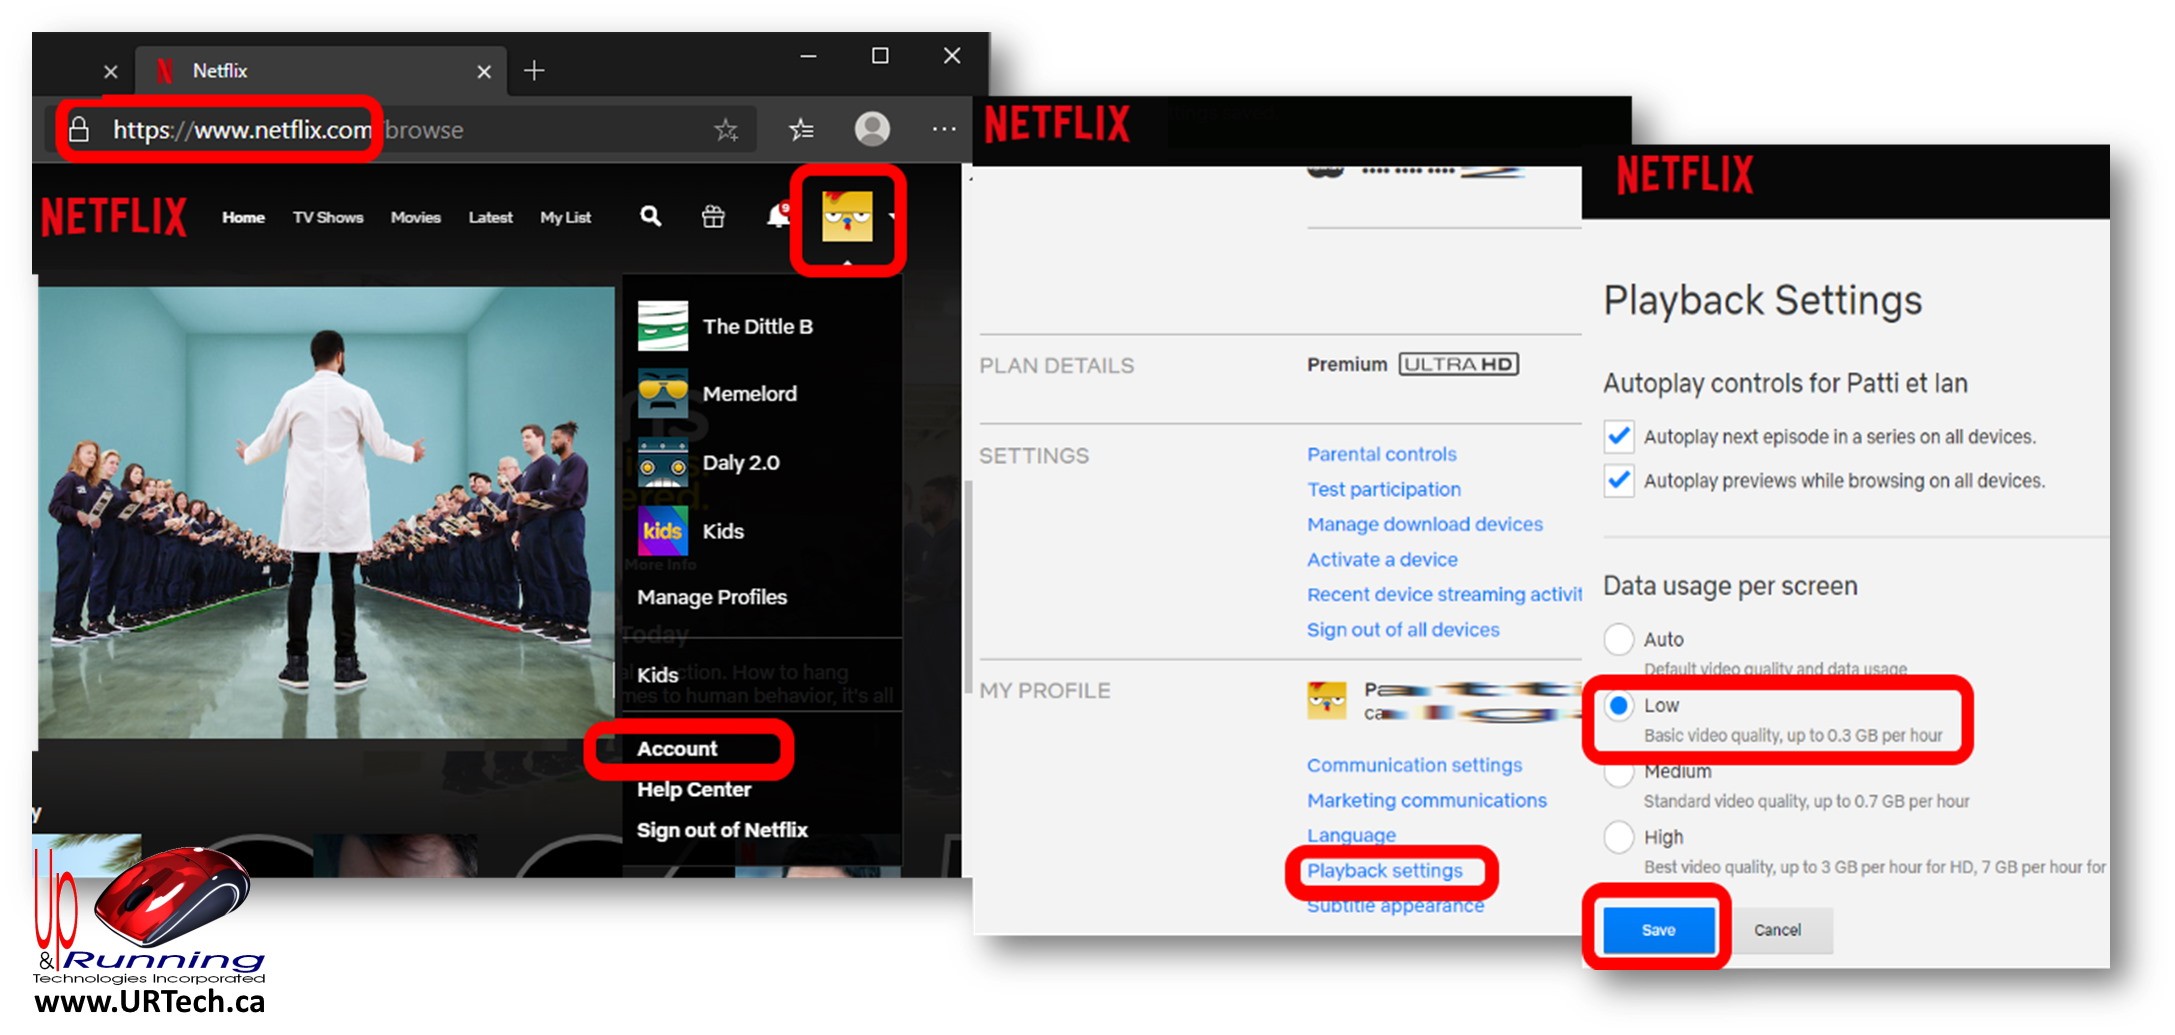 How To Change the Video Quality on your Netflix Account